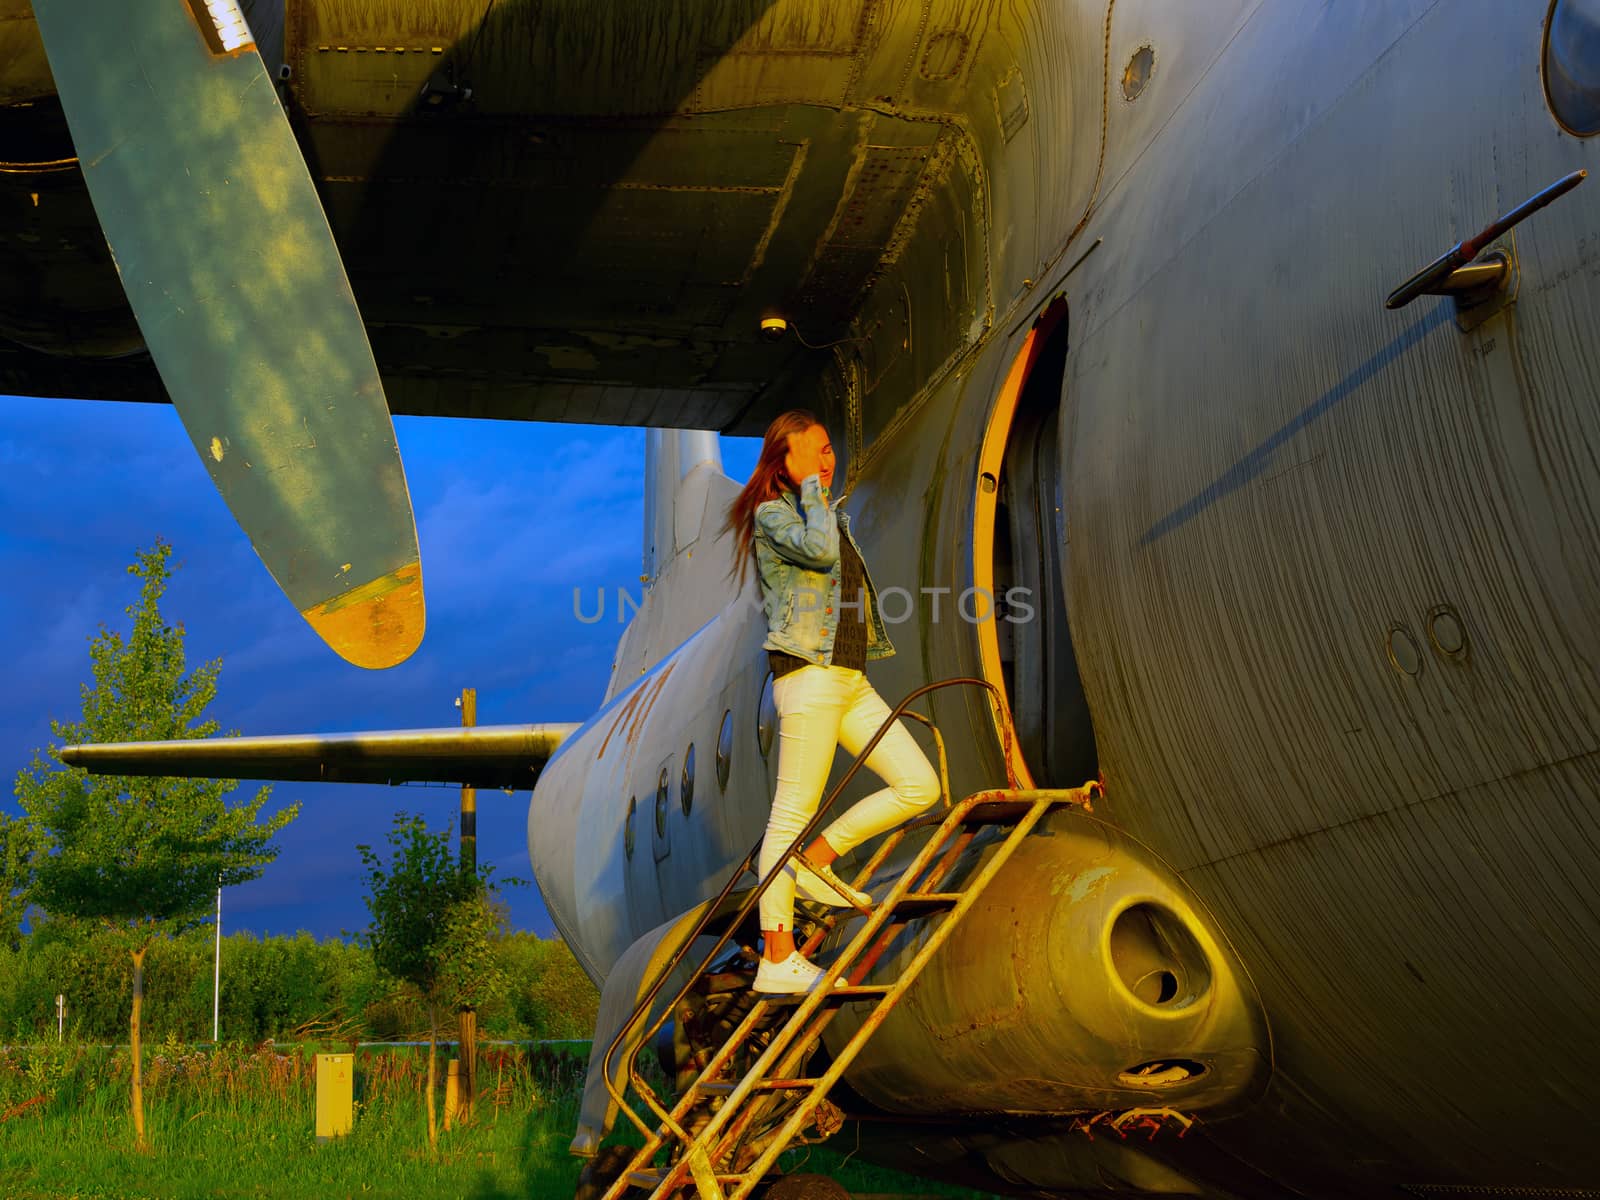 Yo ungwoman standing at plane ladder going to board, outdoors, airport. Old Soviet military airplane, sunset time. Close up of a Abandoned Historic AircraftAN-12. Close up of propeller engine.